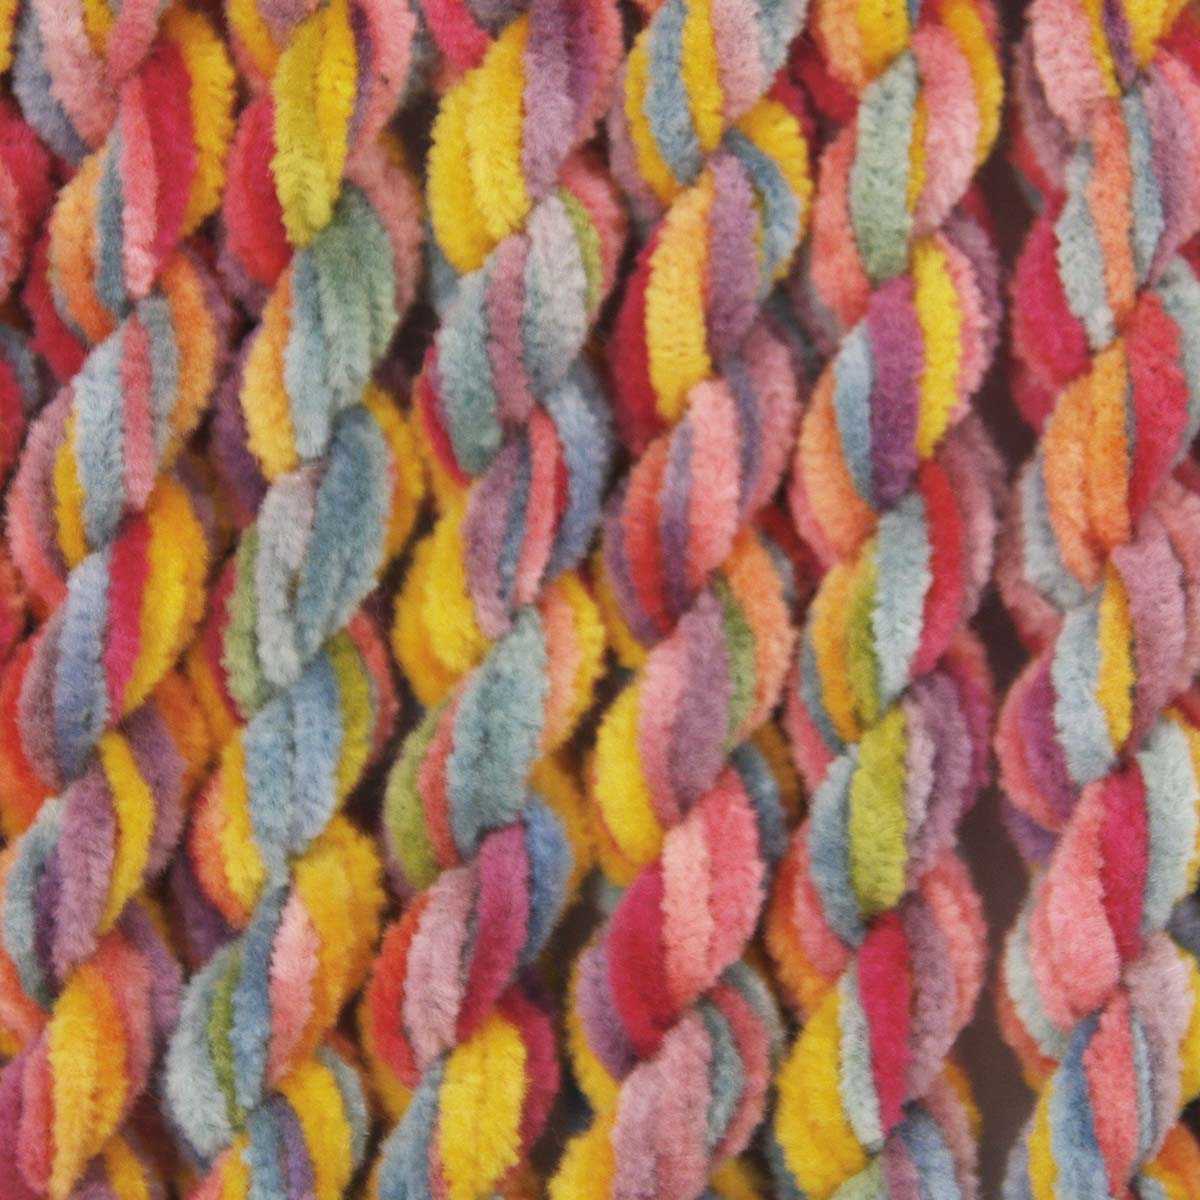 www.colourstreams.com.au Colour Streams Hand Dyed Chenille Threads Slow Stitch Embroidery Textile Arts Fibre DL 67 Delhi Nights Reds Purples BLues Yellows Oranges Greens